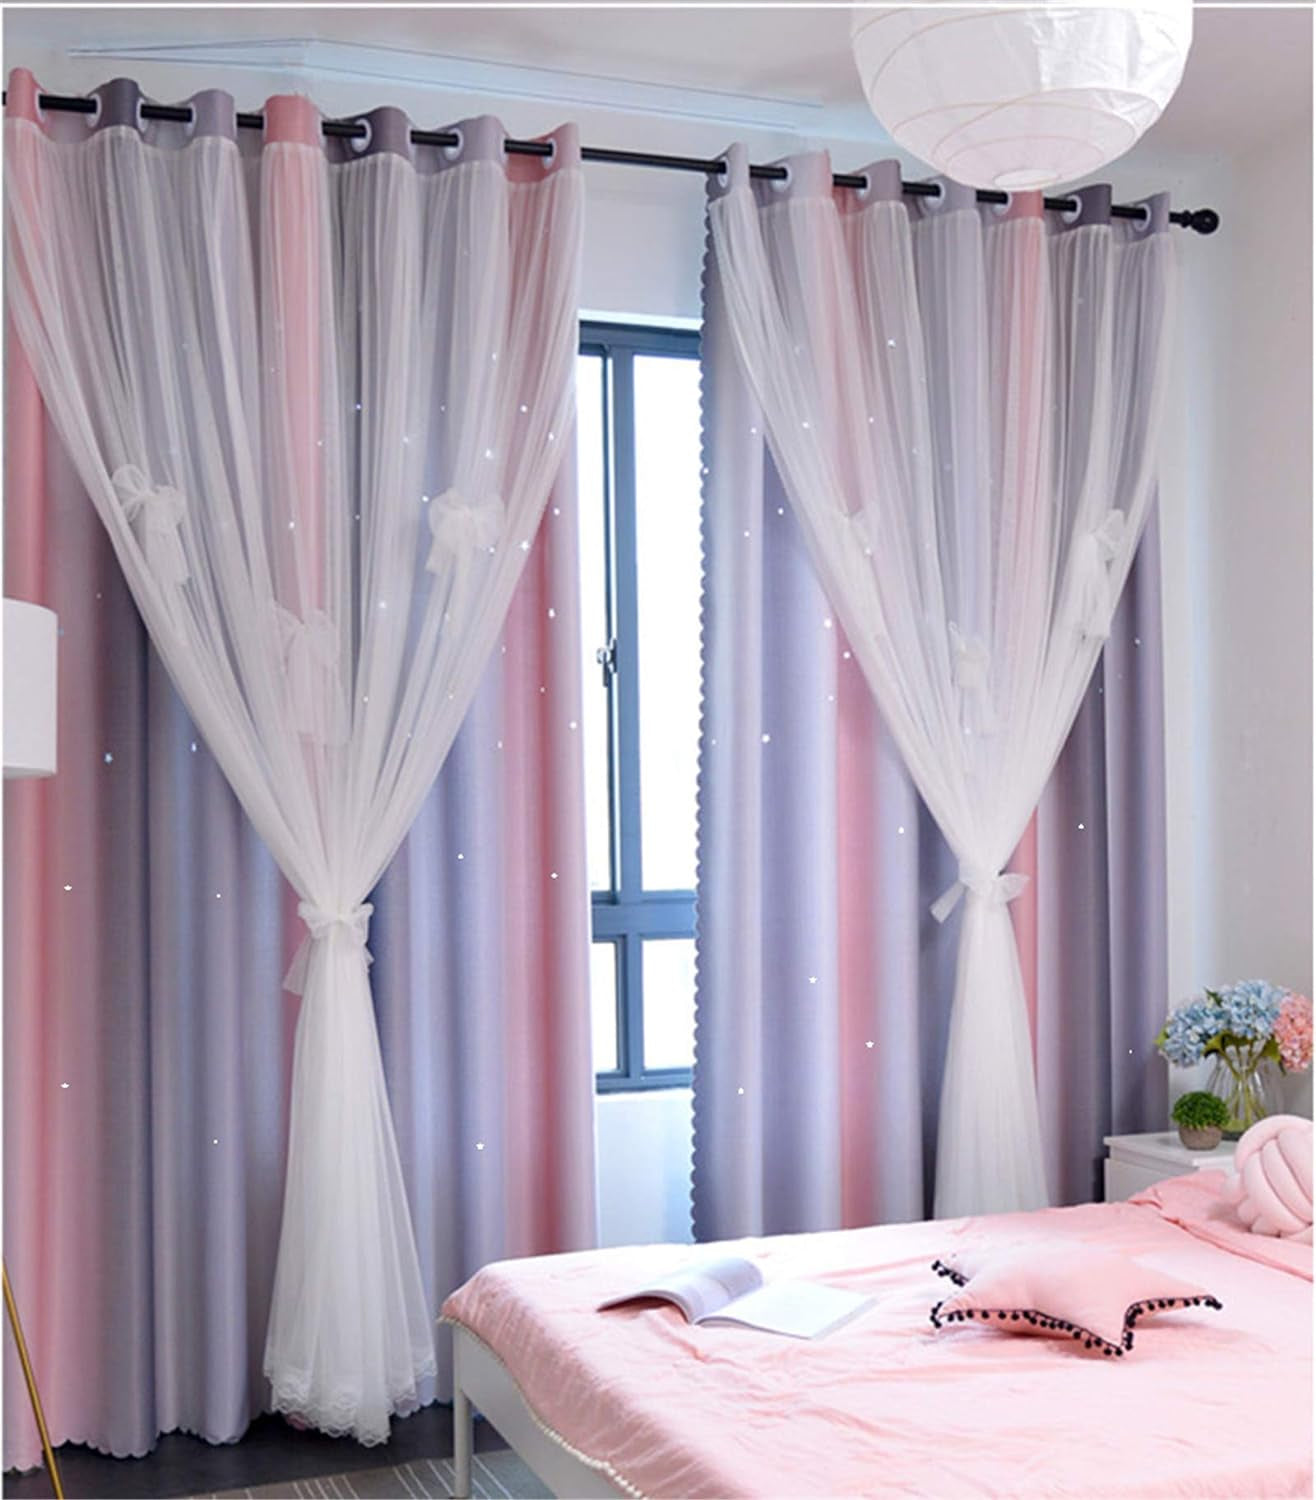 Yancorp Curtains for Girls Bedroom Kids Room Curtain Colorful Window Nursery Curtain 63 Inches Length Room Darkening Grommet 2 Layers (Pink Purple, W52 X L63)  Yancorp Pink Grey W52" X L108" 